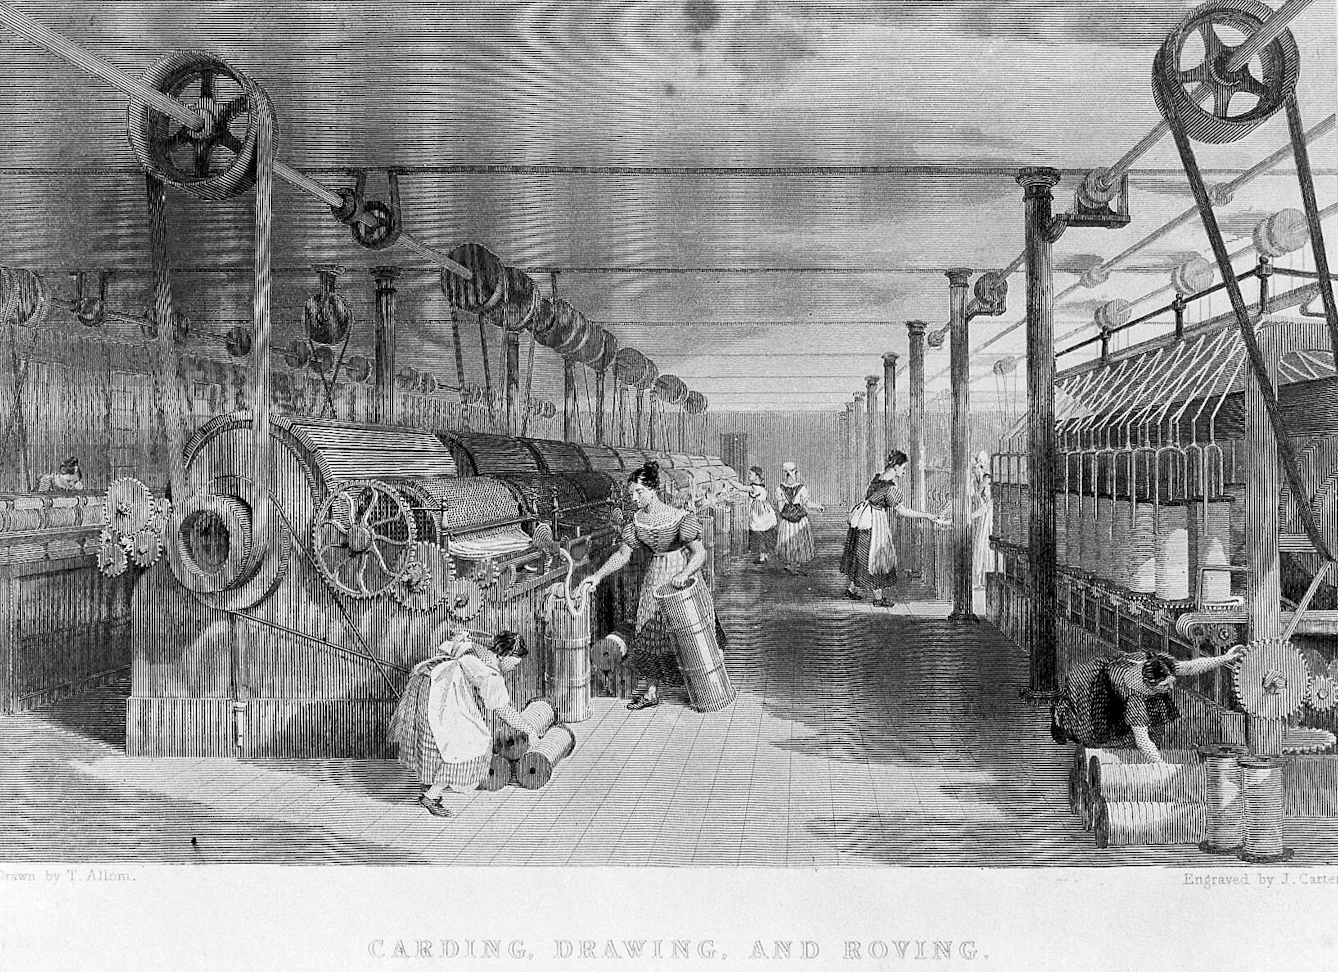 19th century engraving showing several workers in a cotton manufacturing factory. 